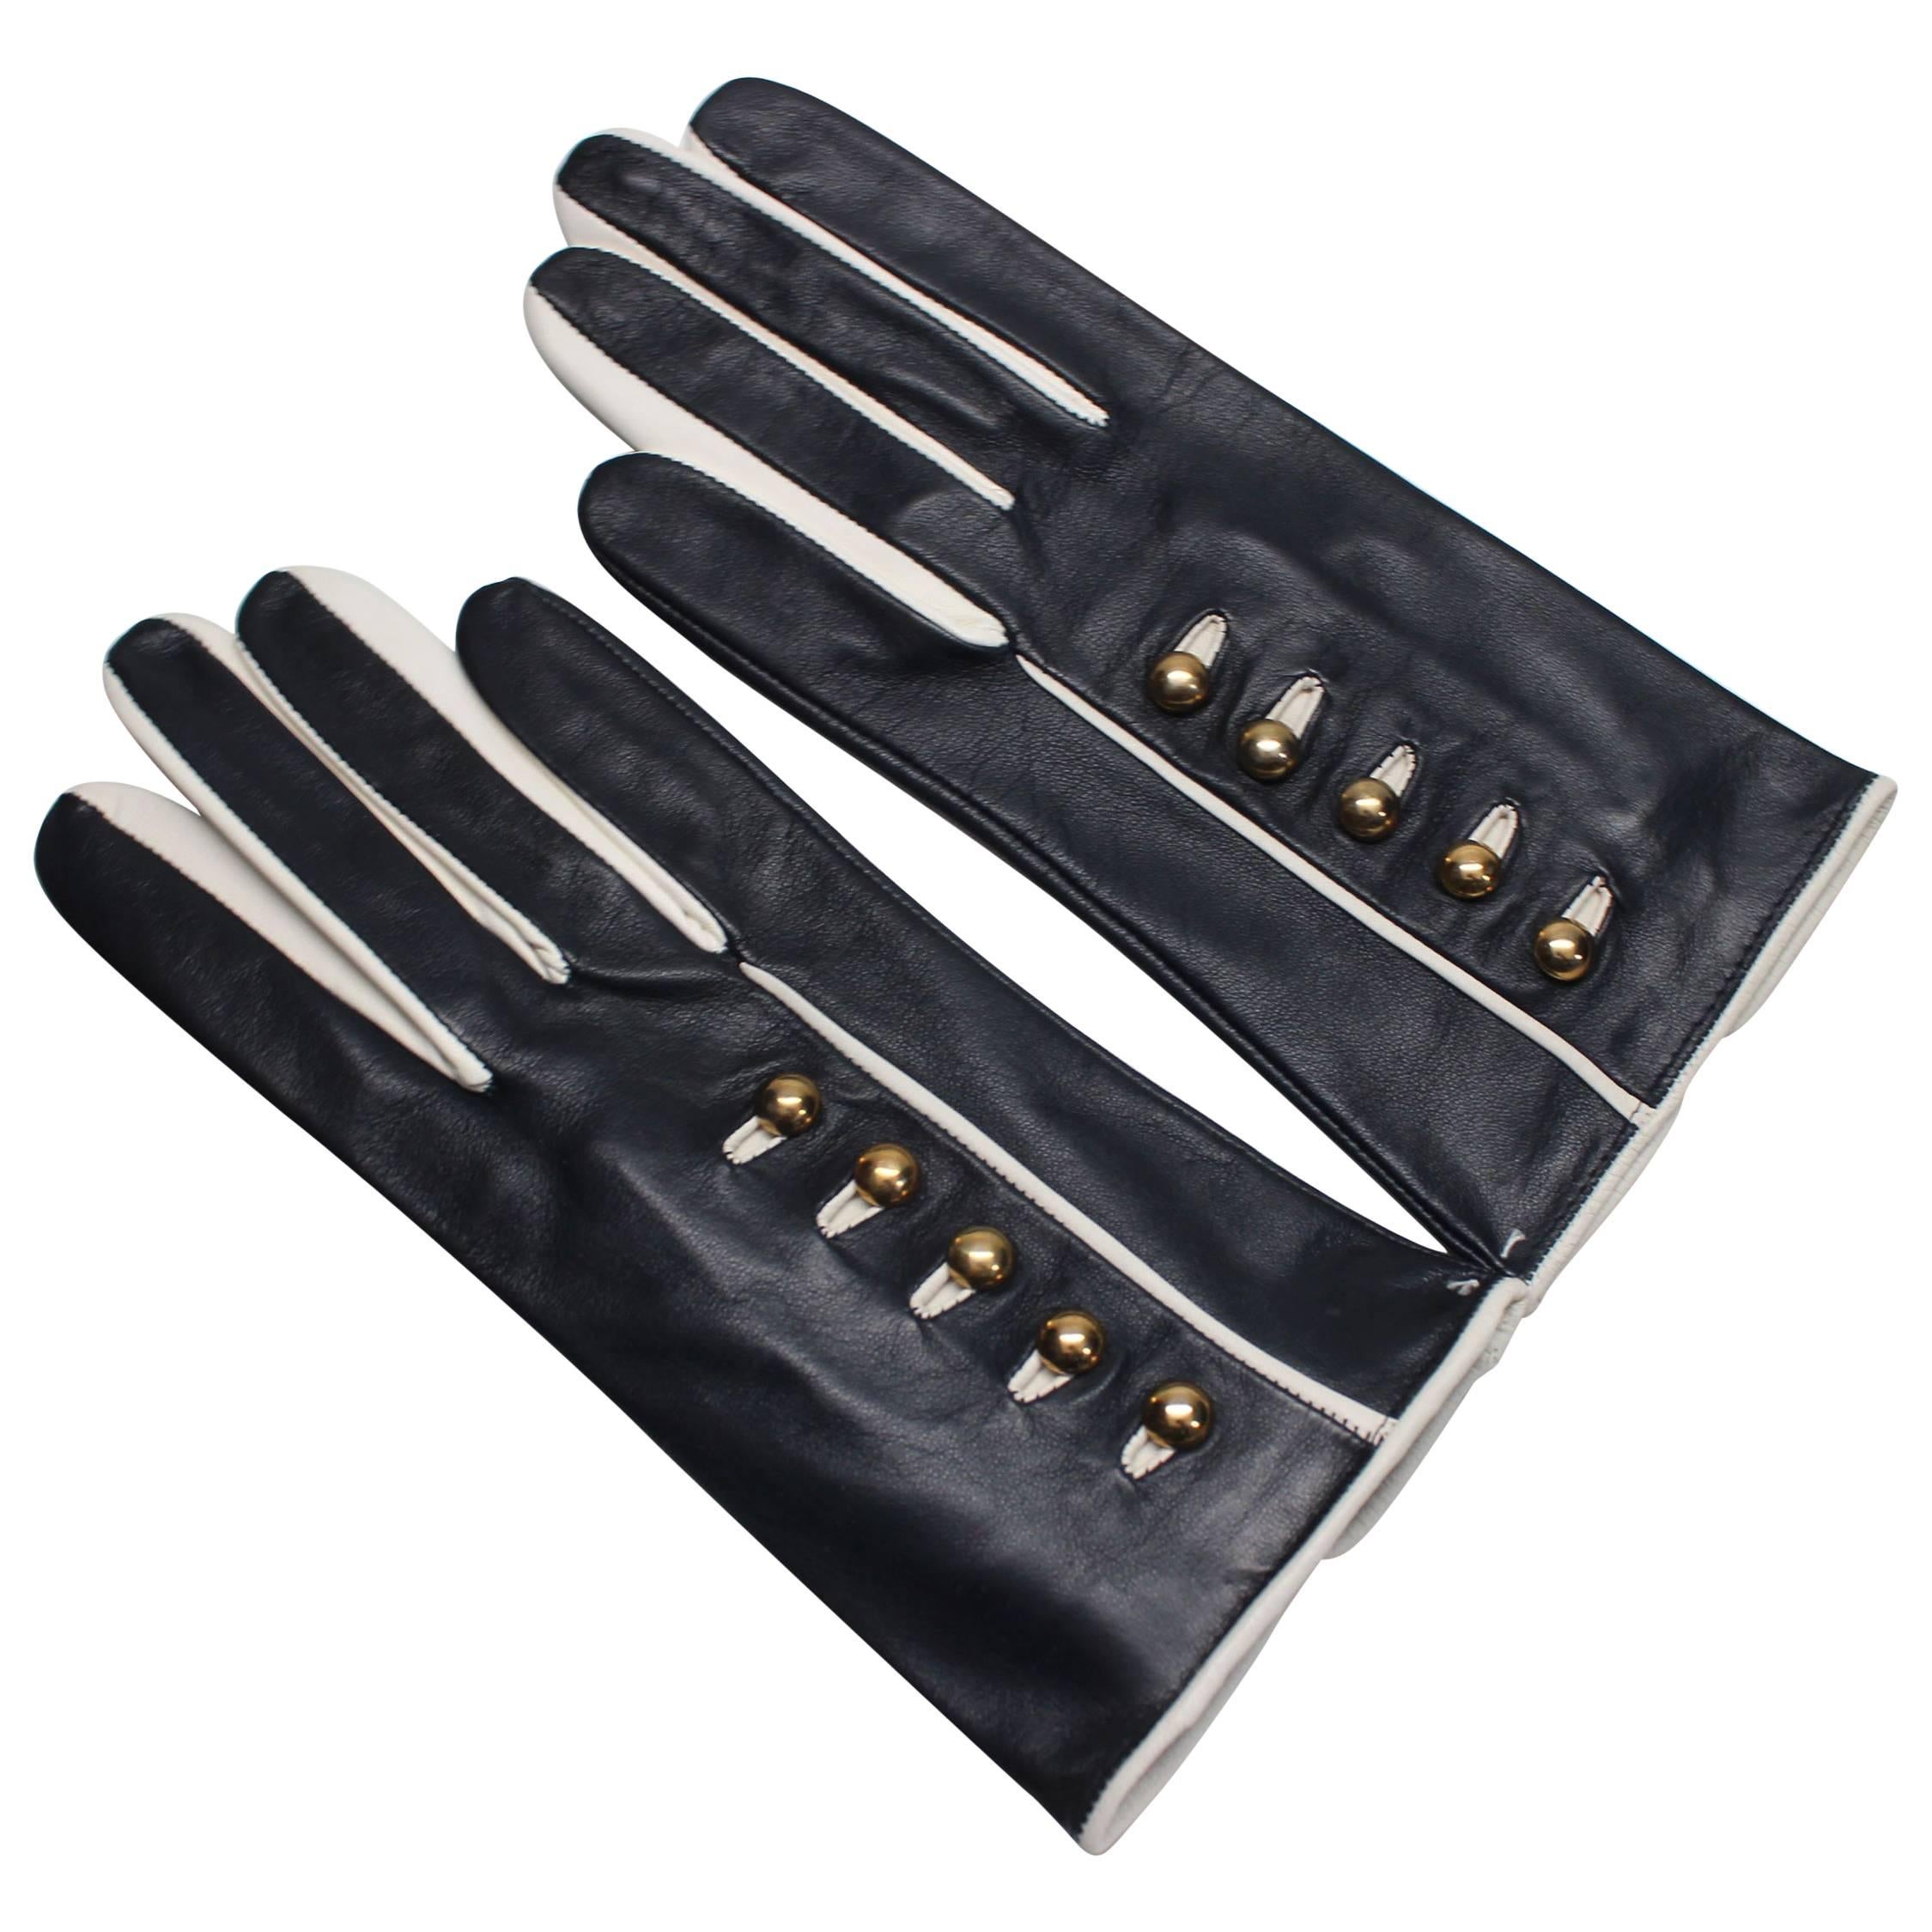 1980s Escada by Margaretha Ley Navy and White Gold Buttoned Leather Gloves